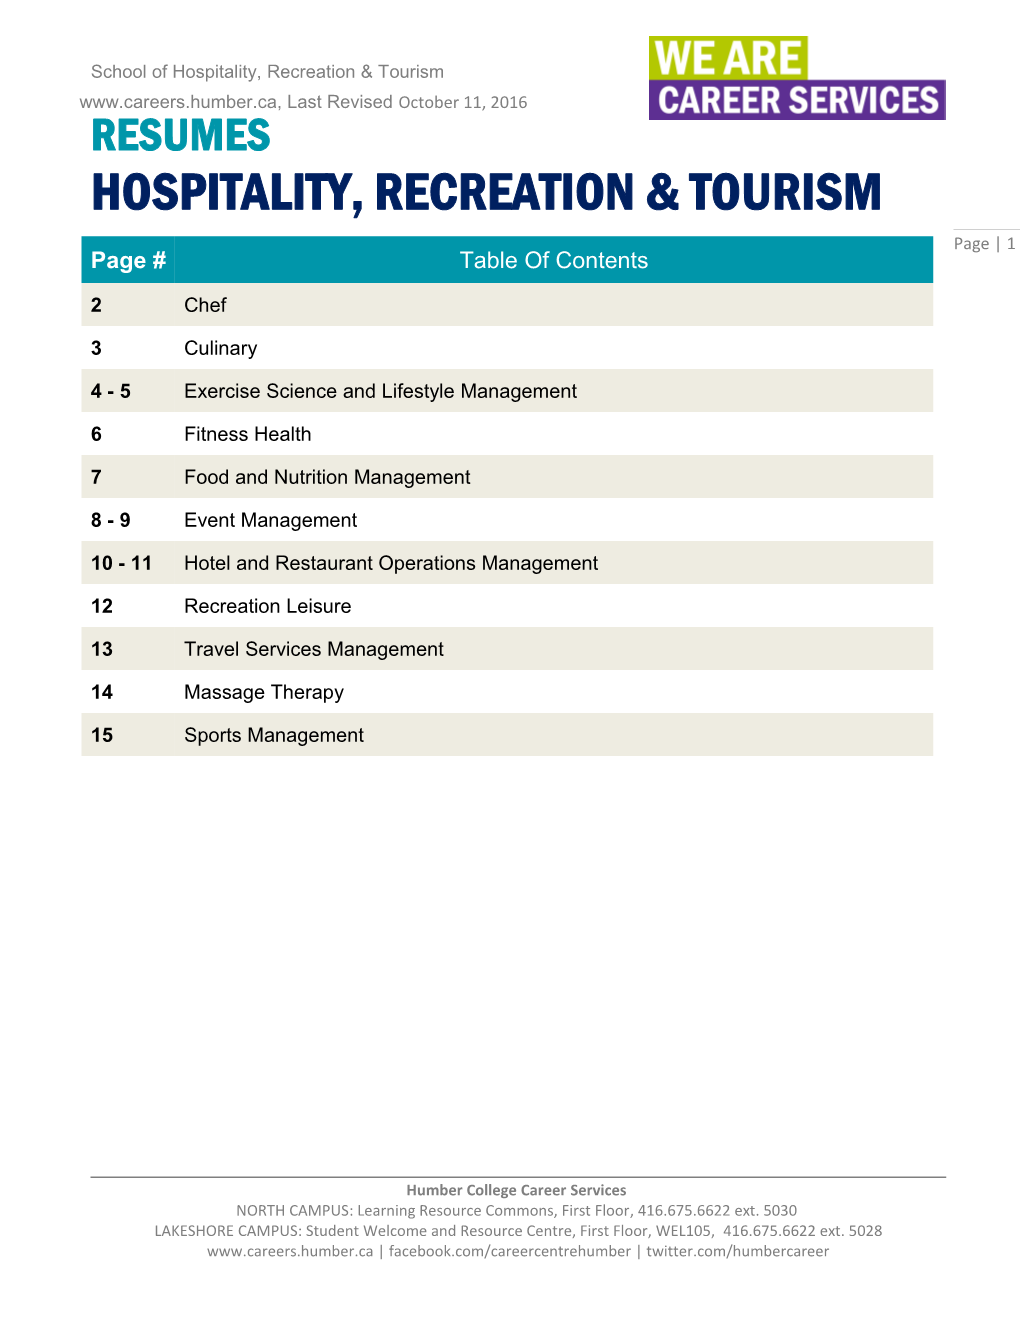 RESUMES HOSPITALITY, RECREATION & TOURISM Page | 1 Page # Table of Contents